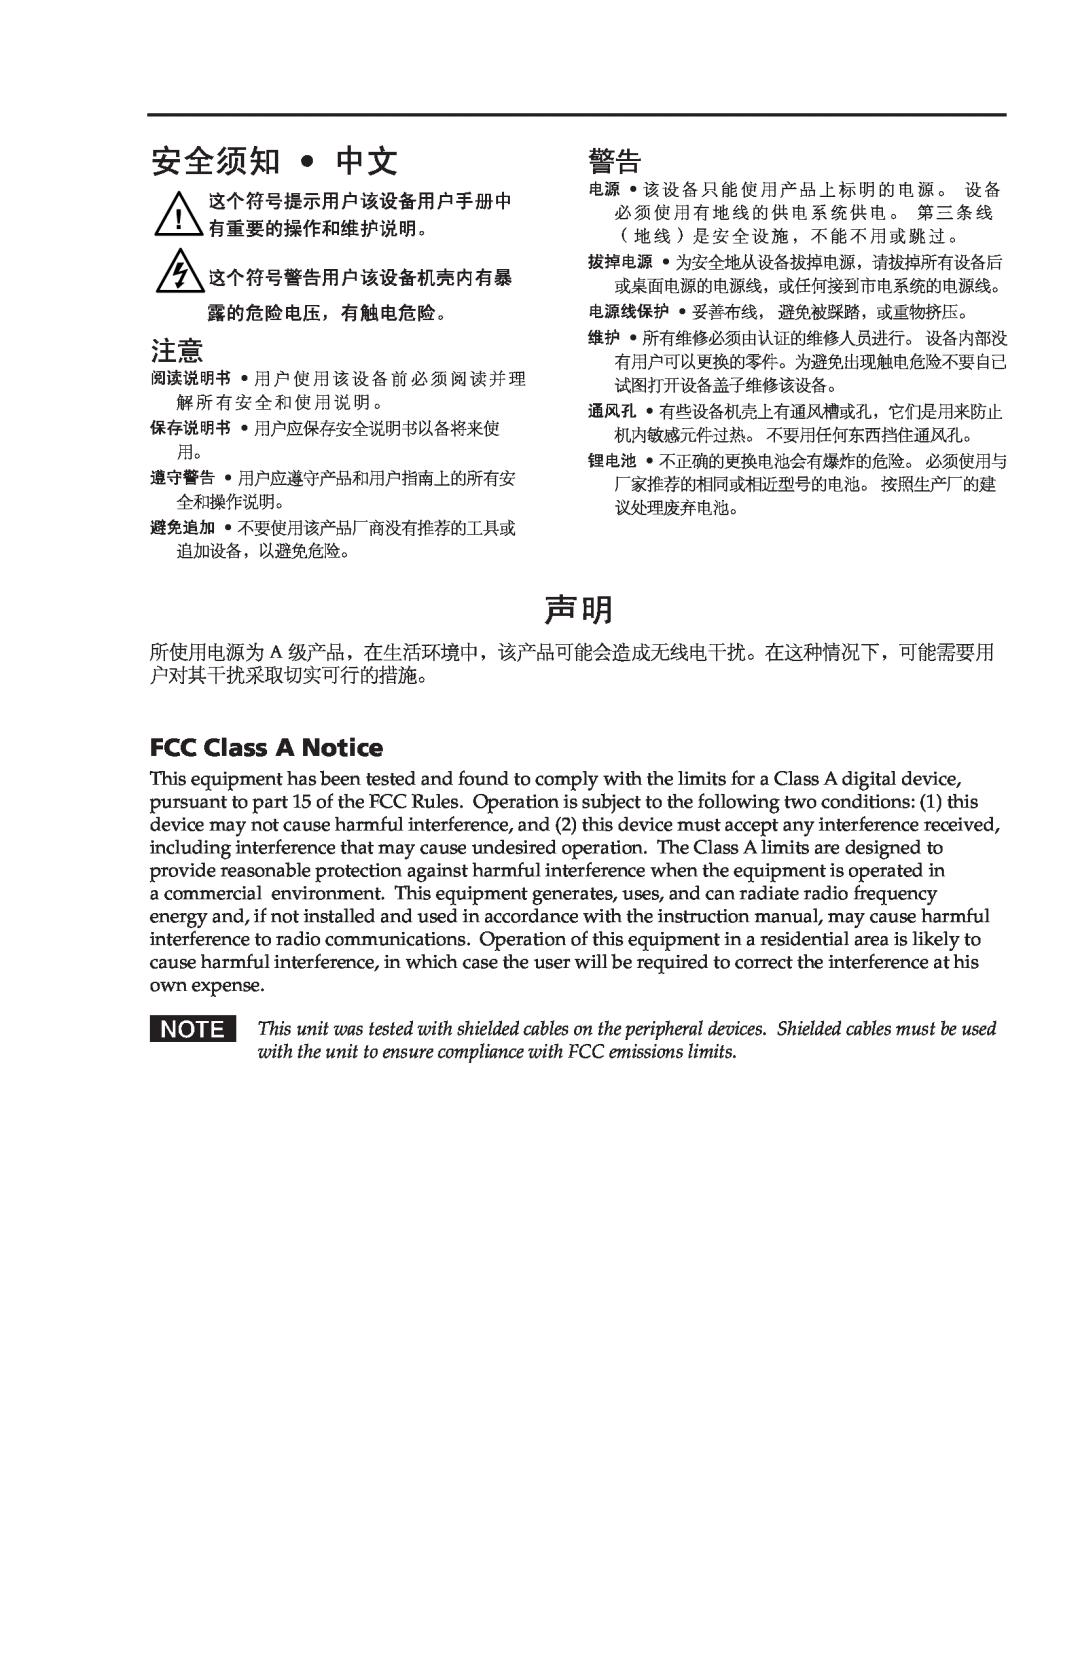 Extron electronic MTP 4T 15HD RS user manual 安全须知 中文 